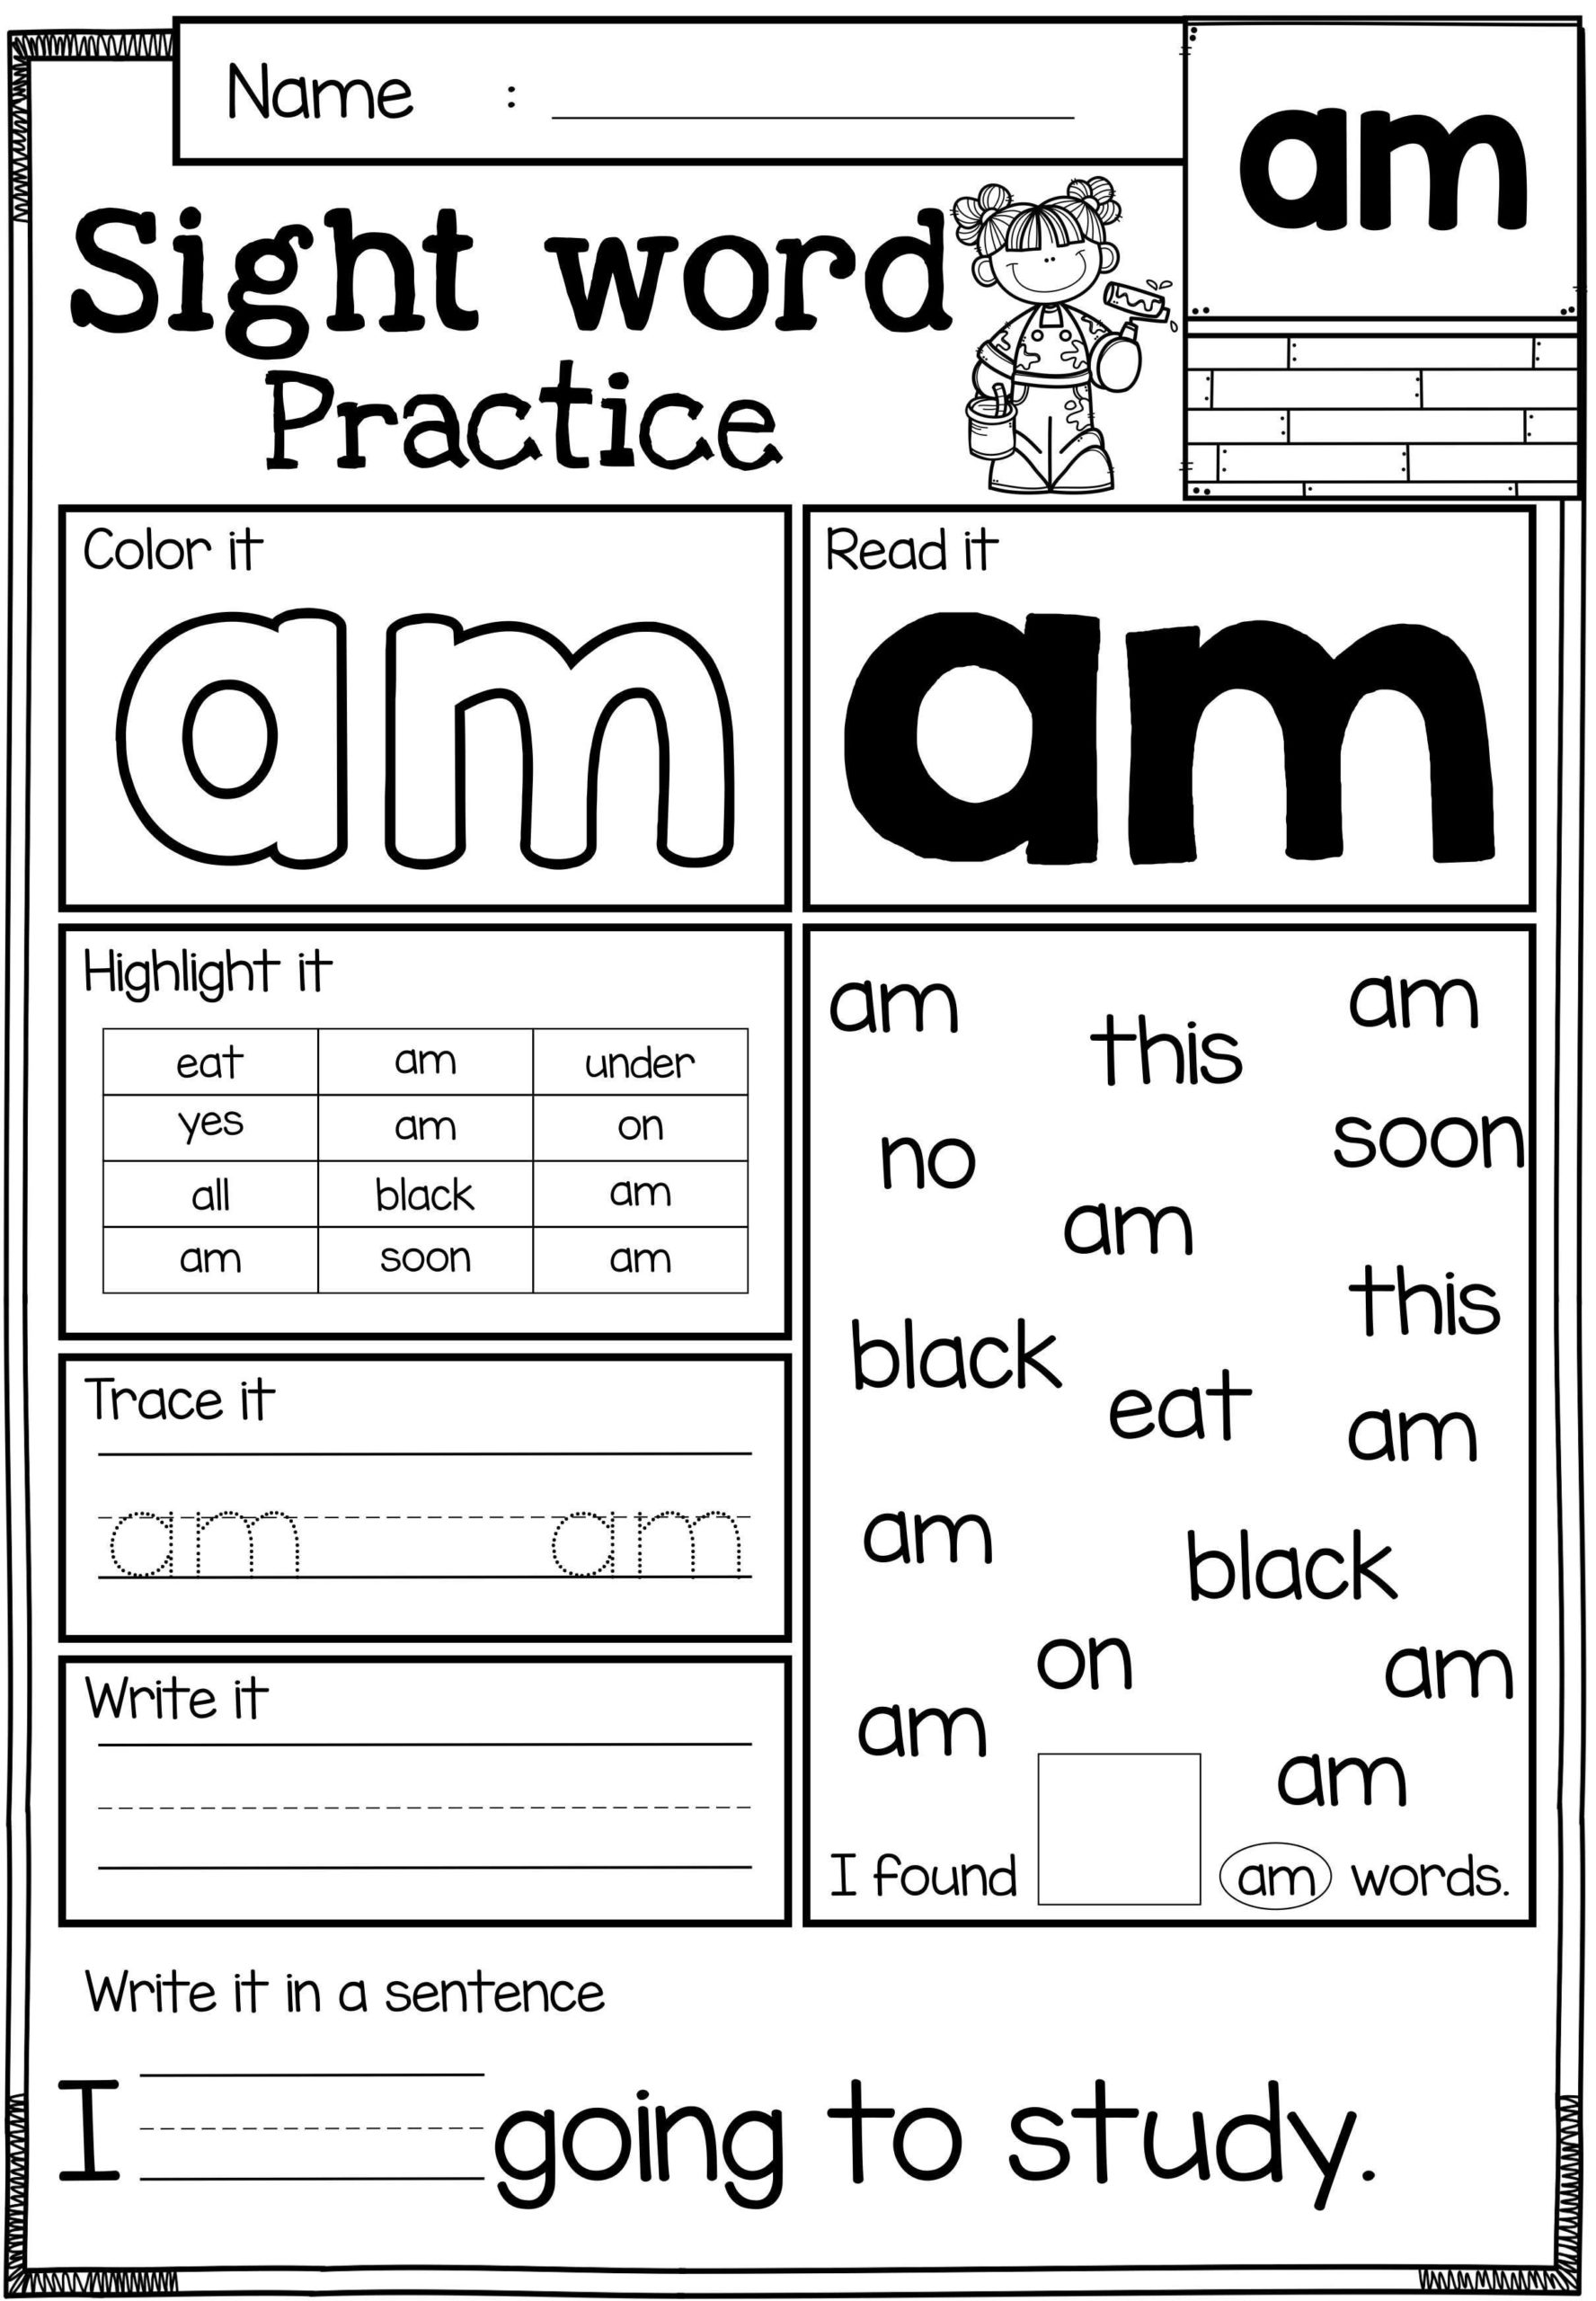 Sight Word Practice (Primer) | Sight Word Practice, Sight